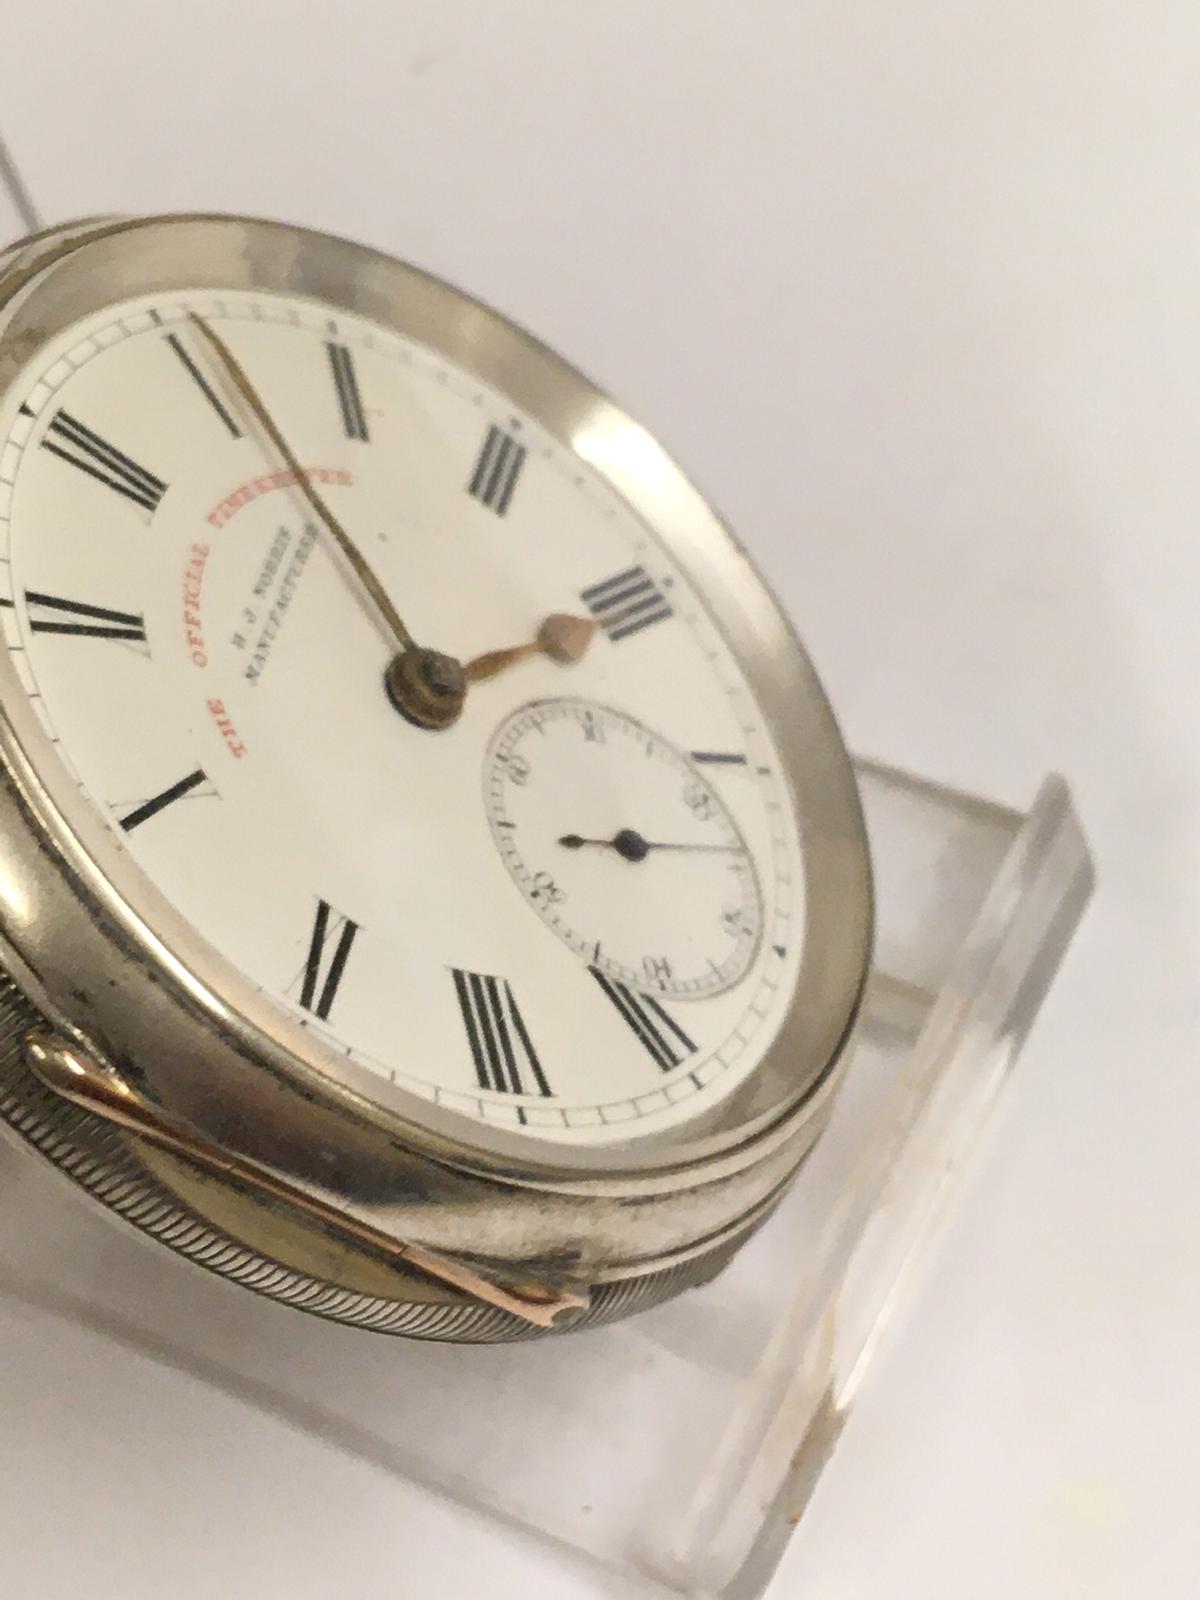 Antique silver lever pocket watch ( Coventry ). Ticks if shaken but no key . Sold with no guarantees - Image 3 of 11